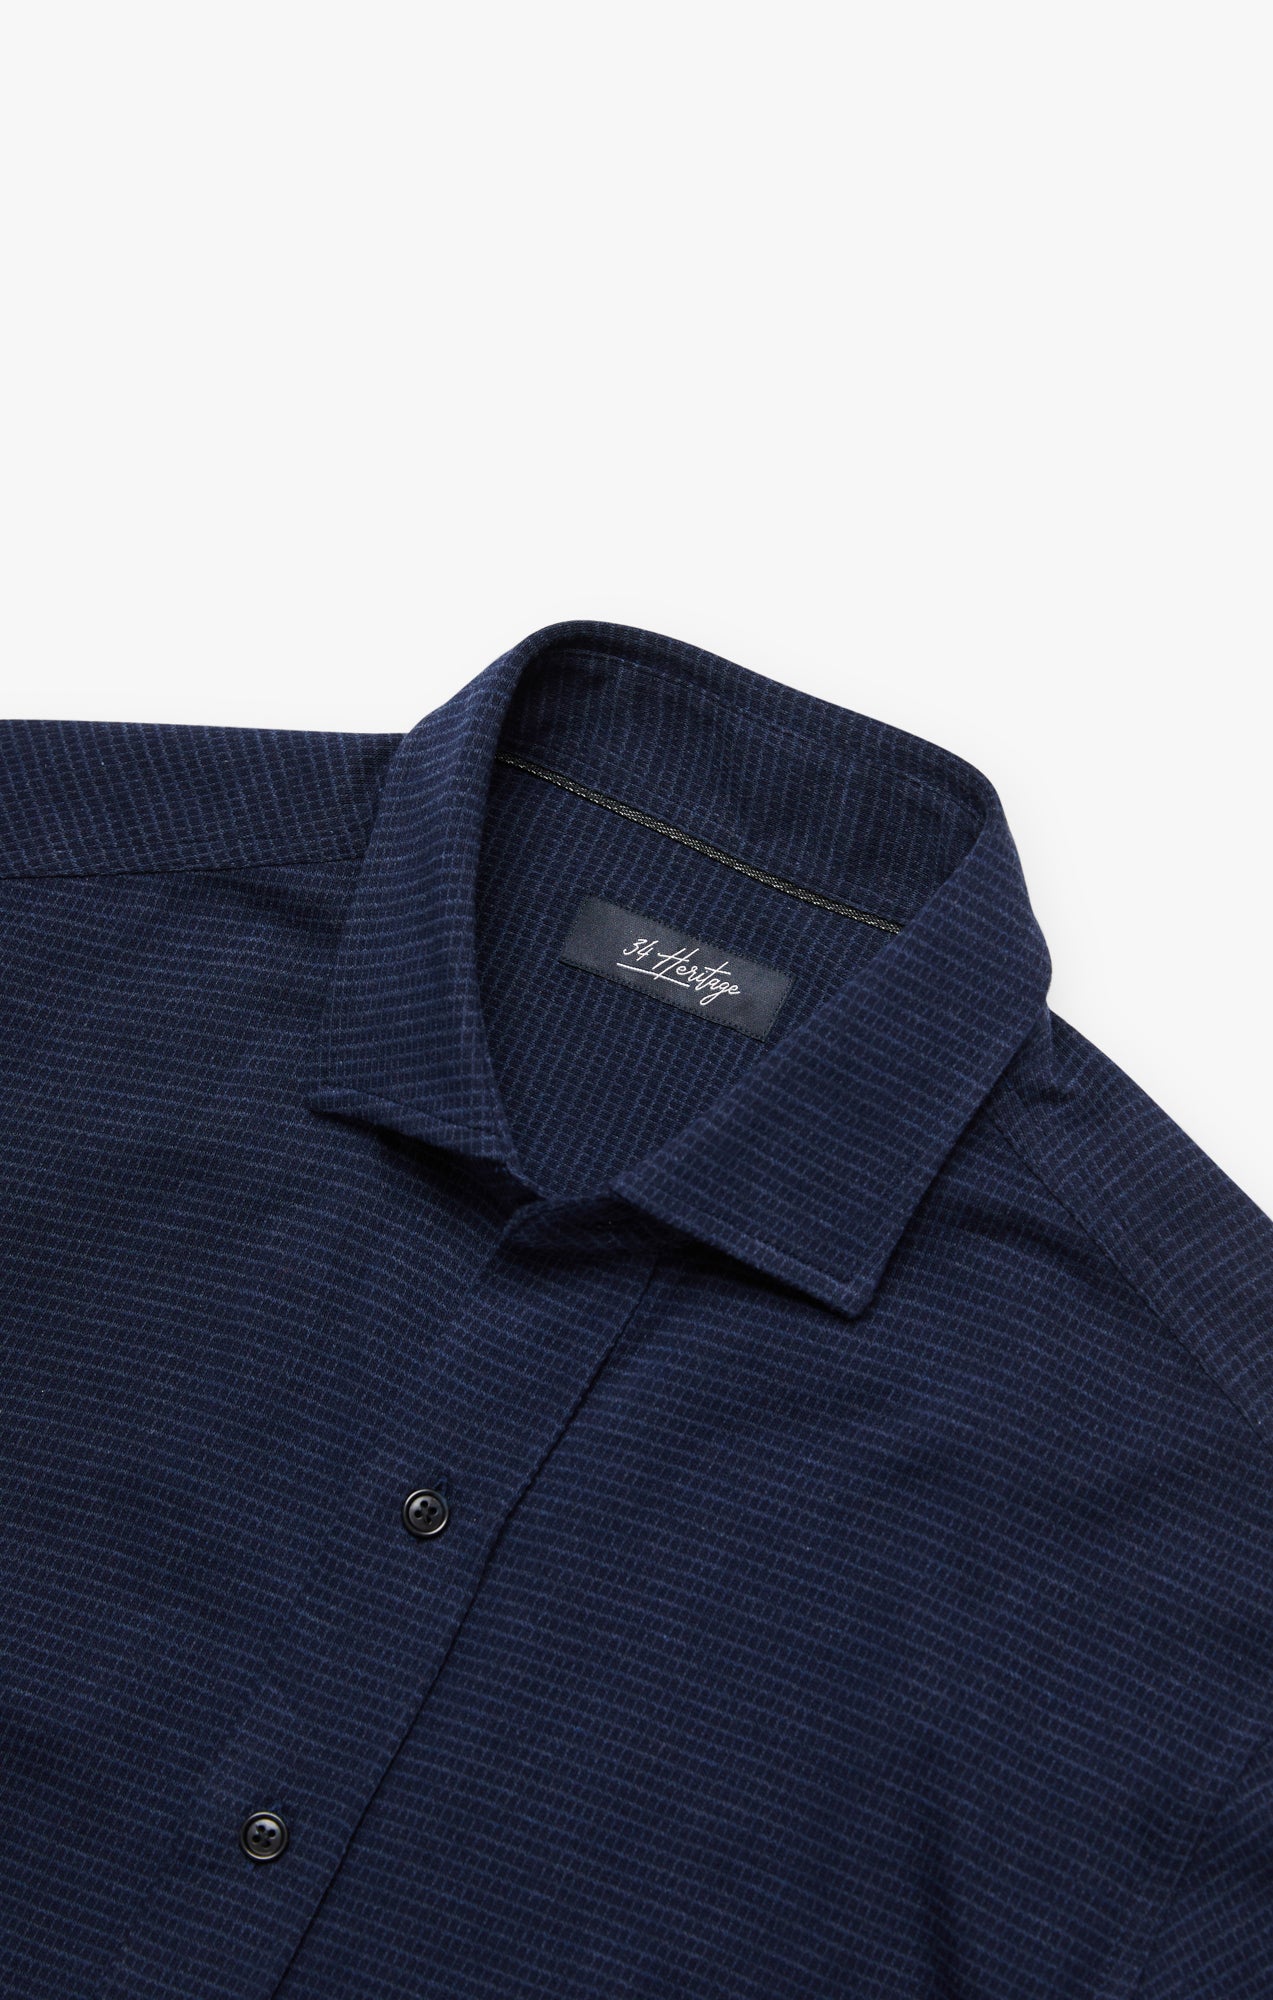 Structured Shirt In Navy Blue Image 9